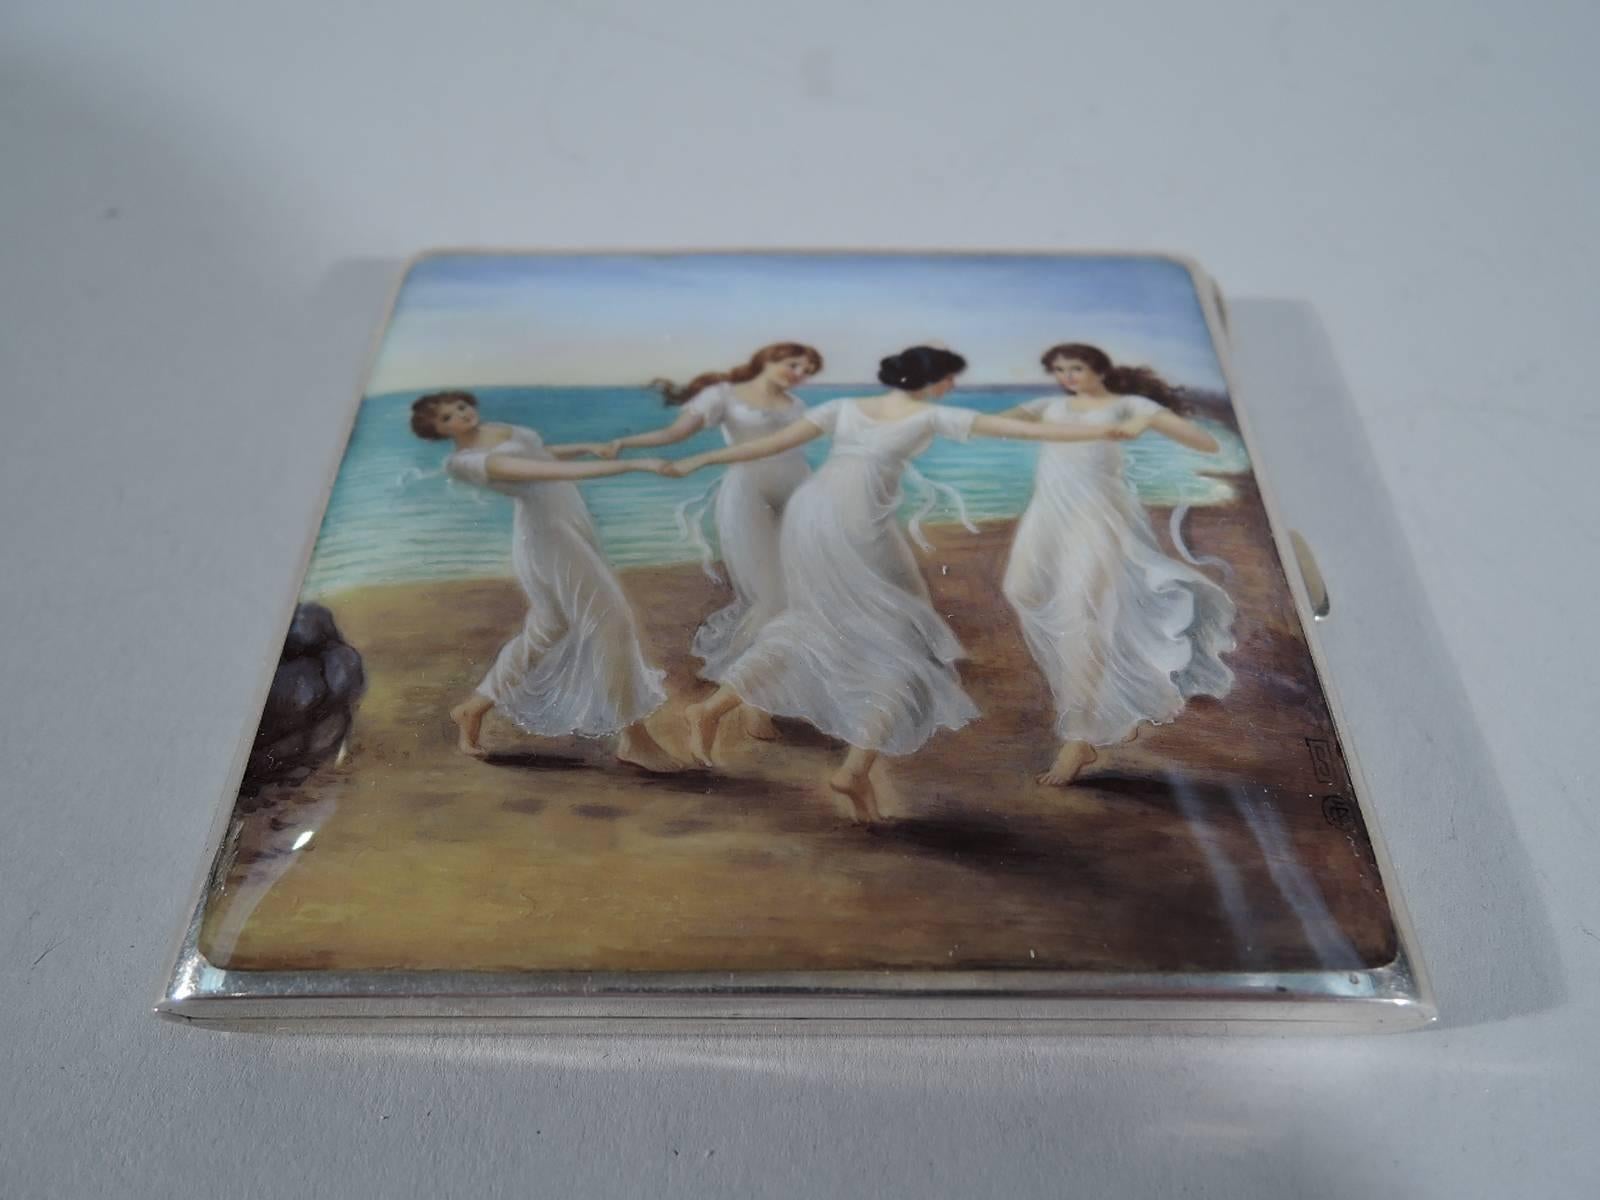 German 935 silver and enamel cigarette case, circa 1920. Rectangular and hinged. On cover enamel beach with four graces in diaphanous gowns dancing in a circle. On back engine-turned ornament. Interior lightly gilt. Hallmarked. 
Weight: 4.5 troy